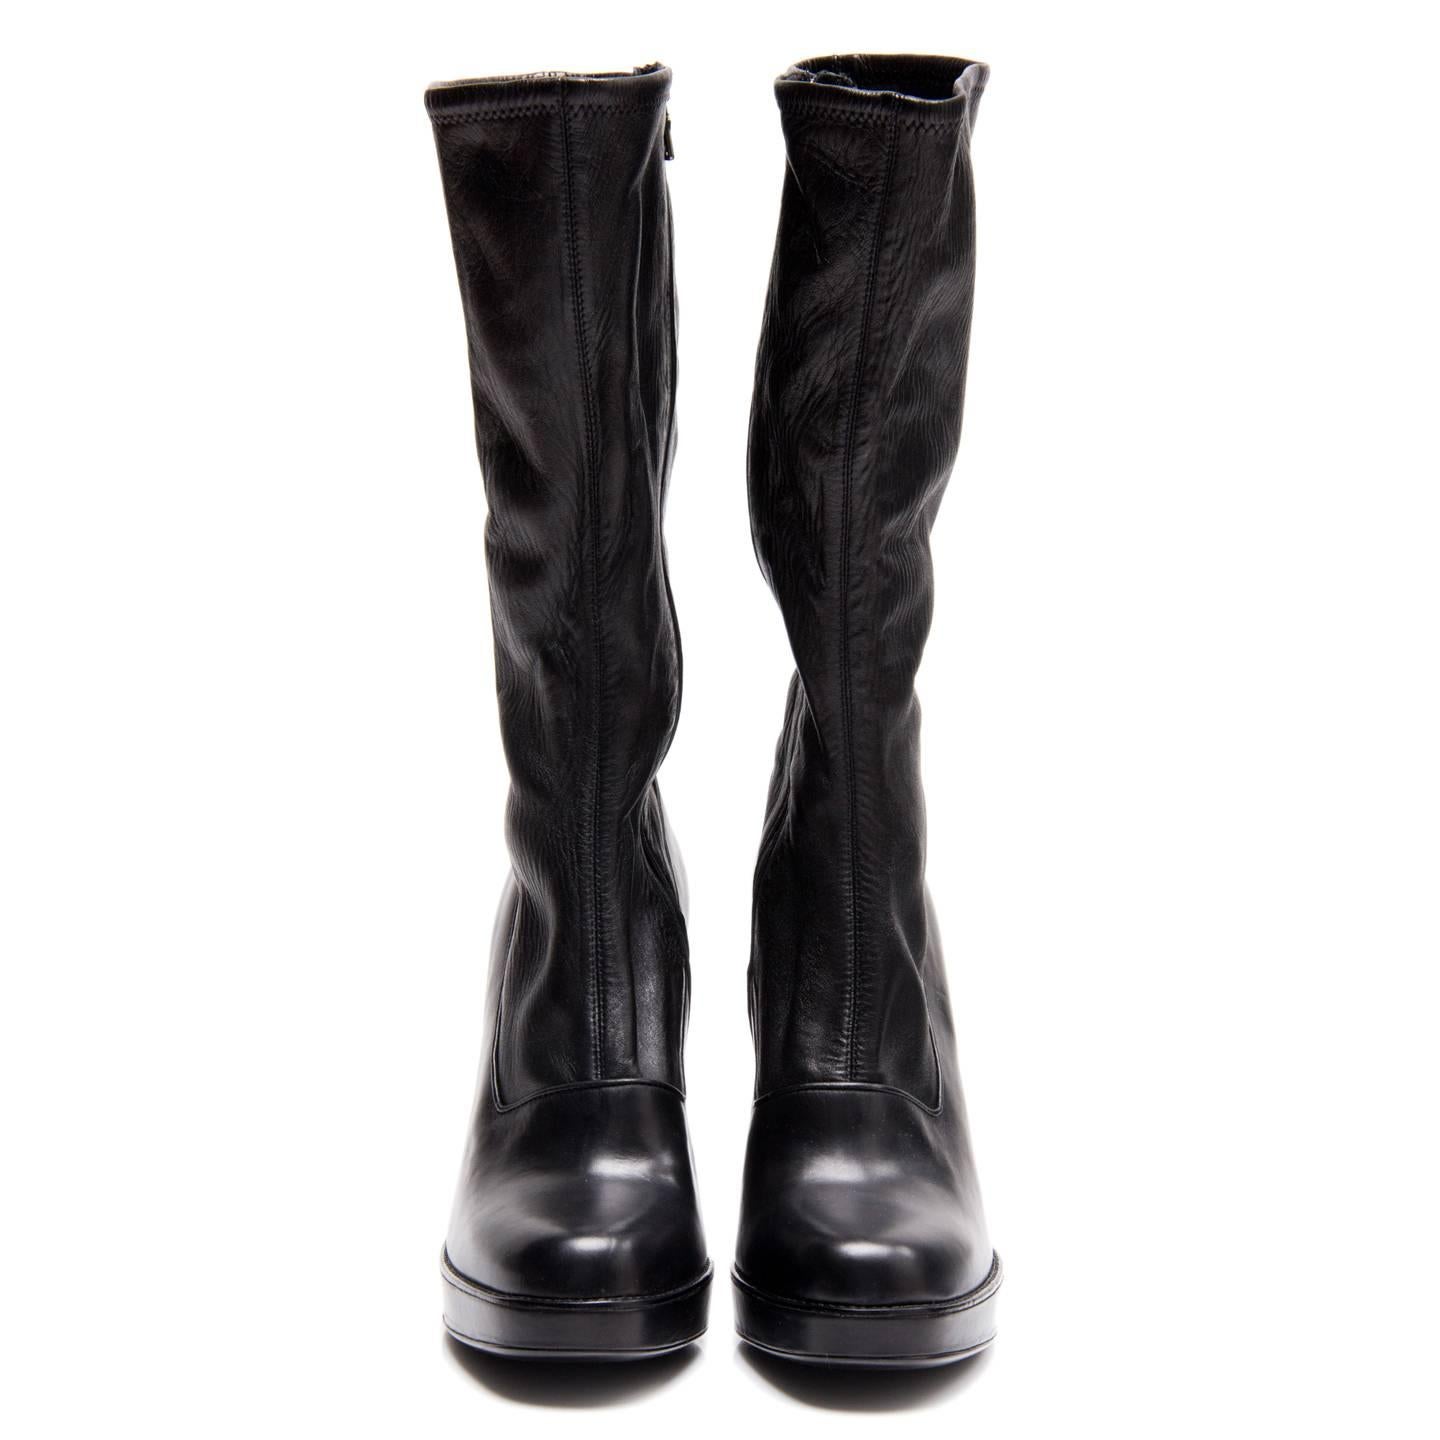 Prada Black Leather High Boots In New Condition For Sale In Brooklyn, NY